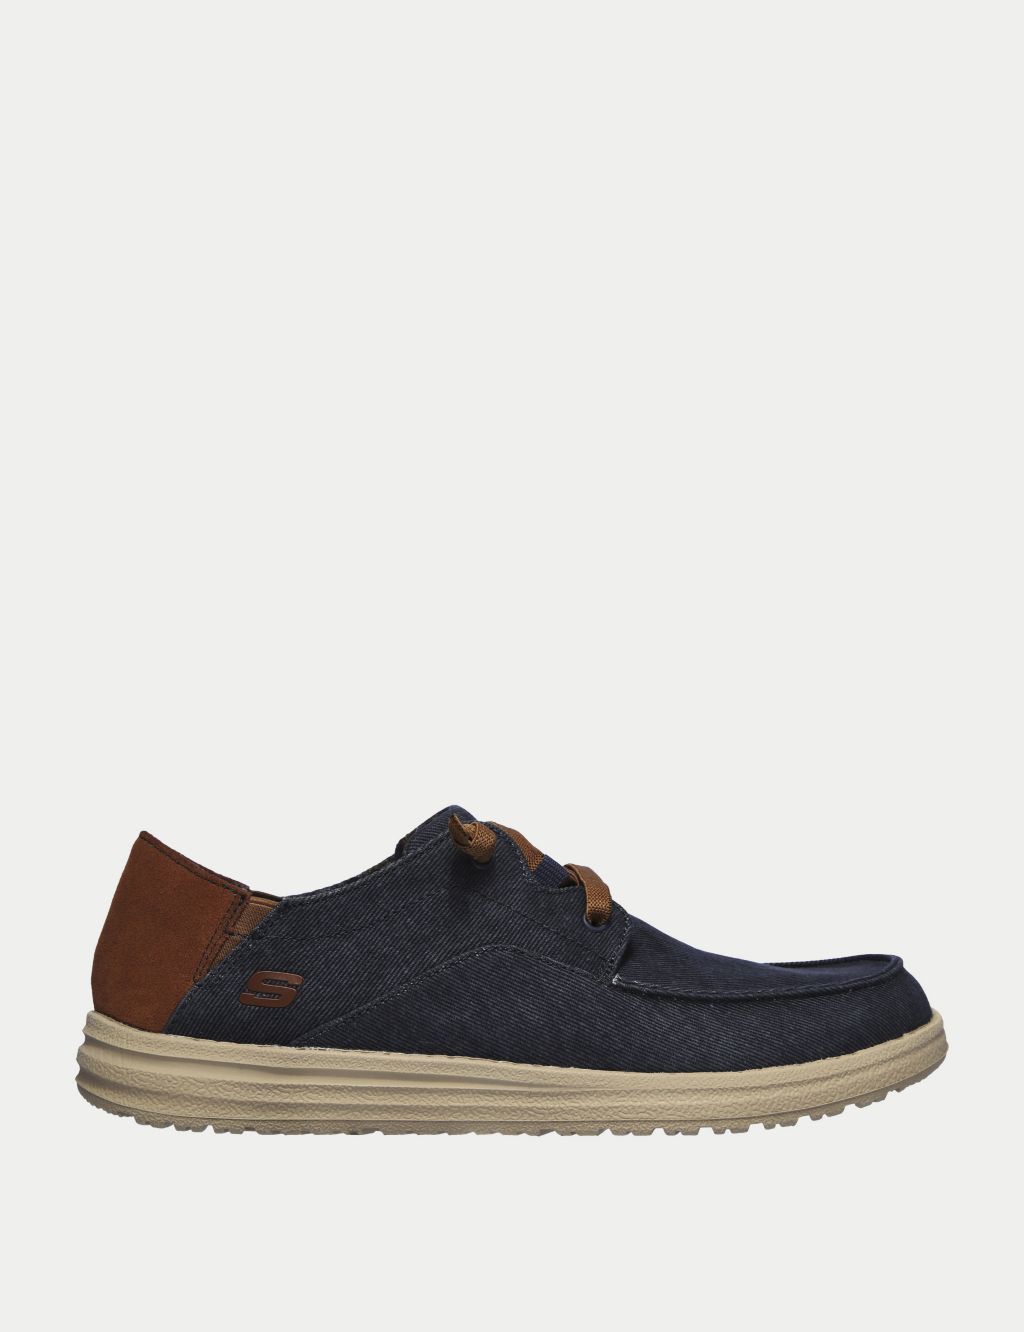 Melson Planon Boat Shoes